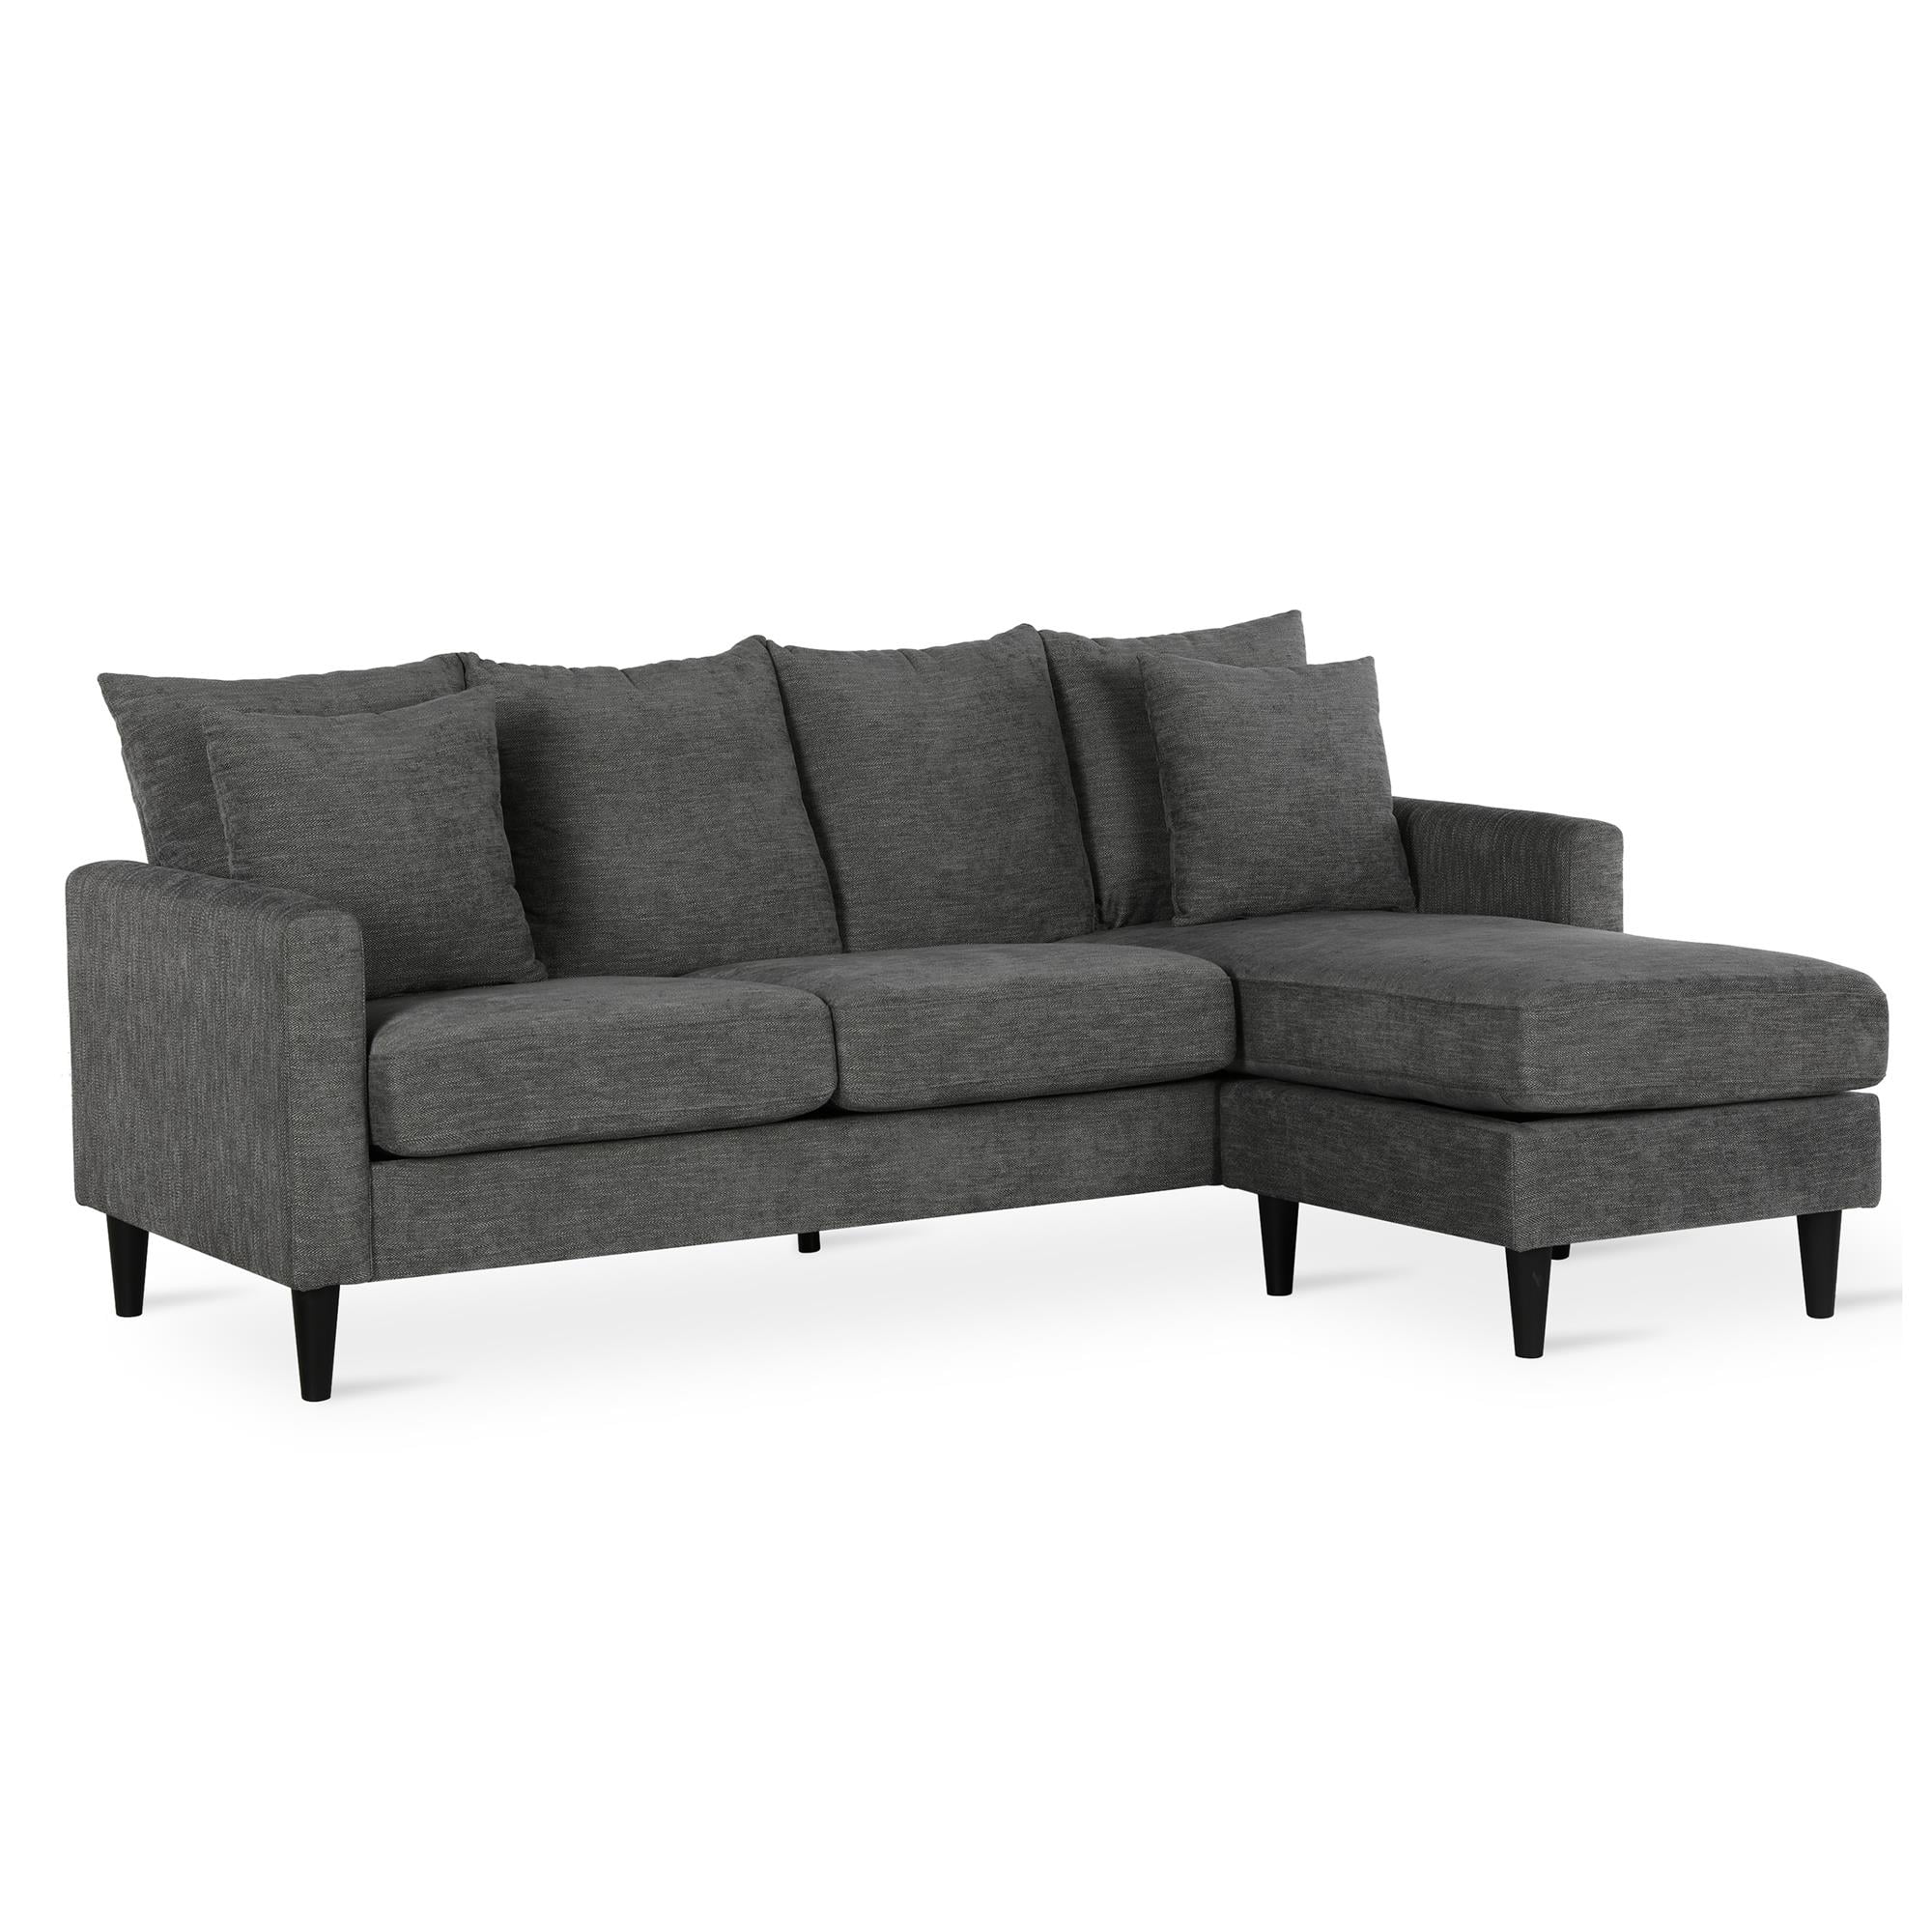 DHP Keaton Reversible Sectional with Pillows (Gray) $354 + Free Shipping